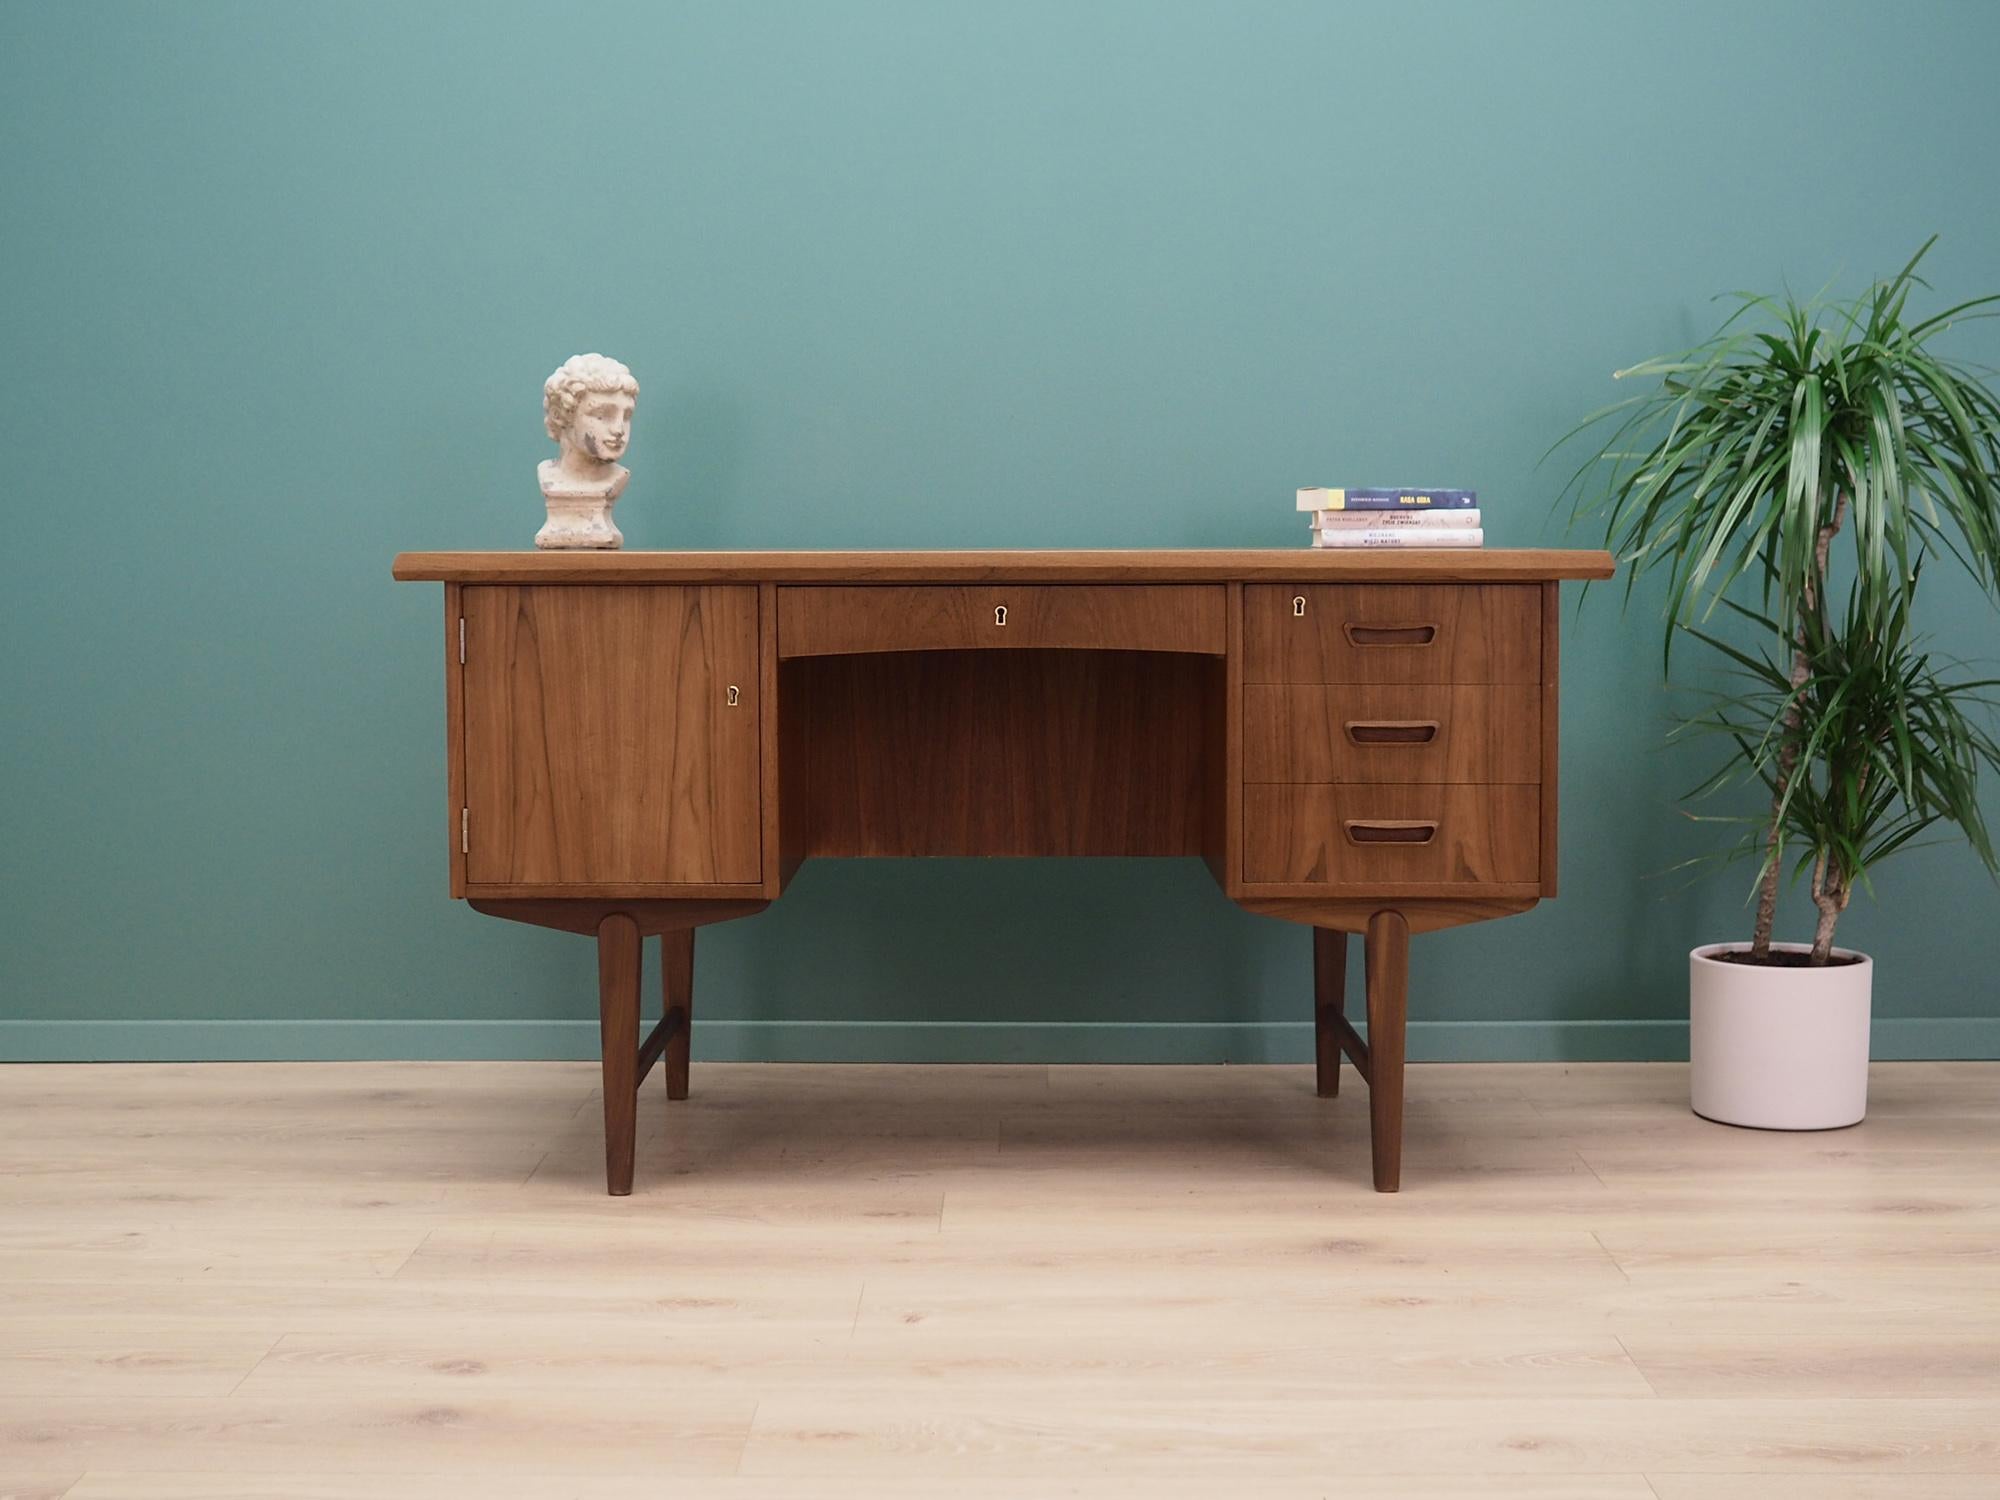 Desk made in the 1960s, Danish production.

The structure and top are covered with teak veneer. The legs are made of solid teak wood. The surface after refreshing. The front of the desk has four drawers and a cabinet. It has a key to locks, locks